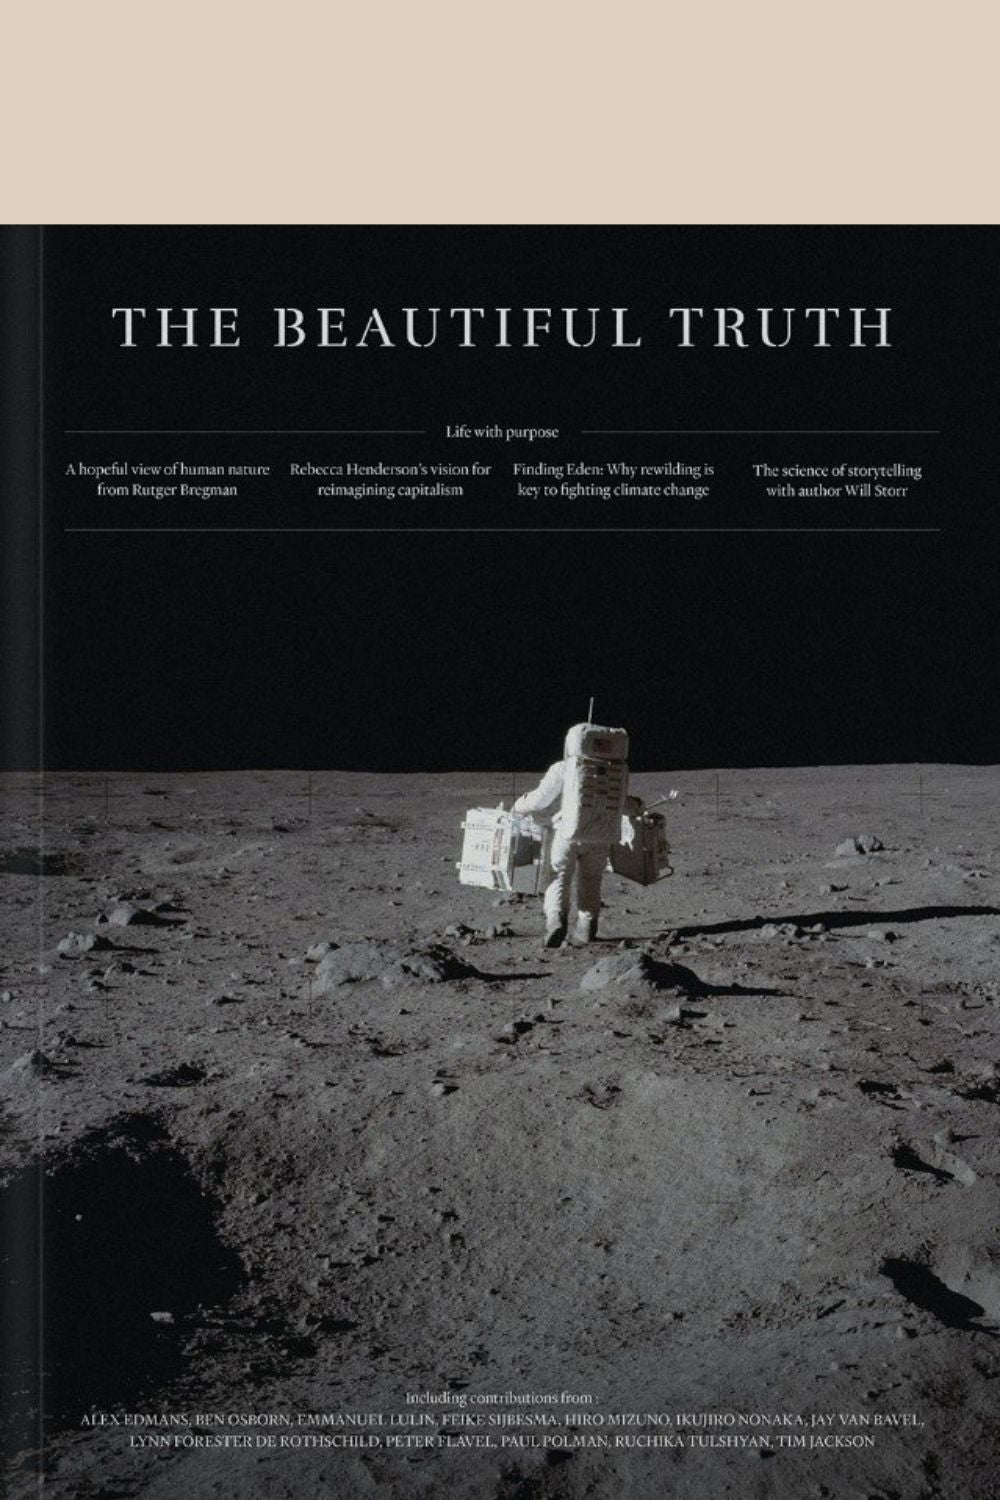 The cover of The Beautiful Truth, issue 1